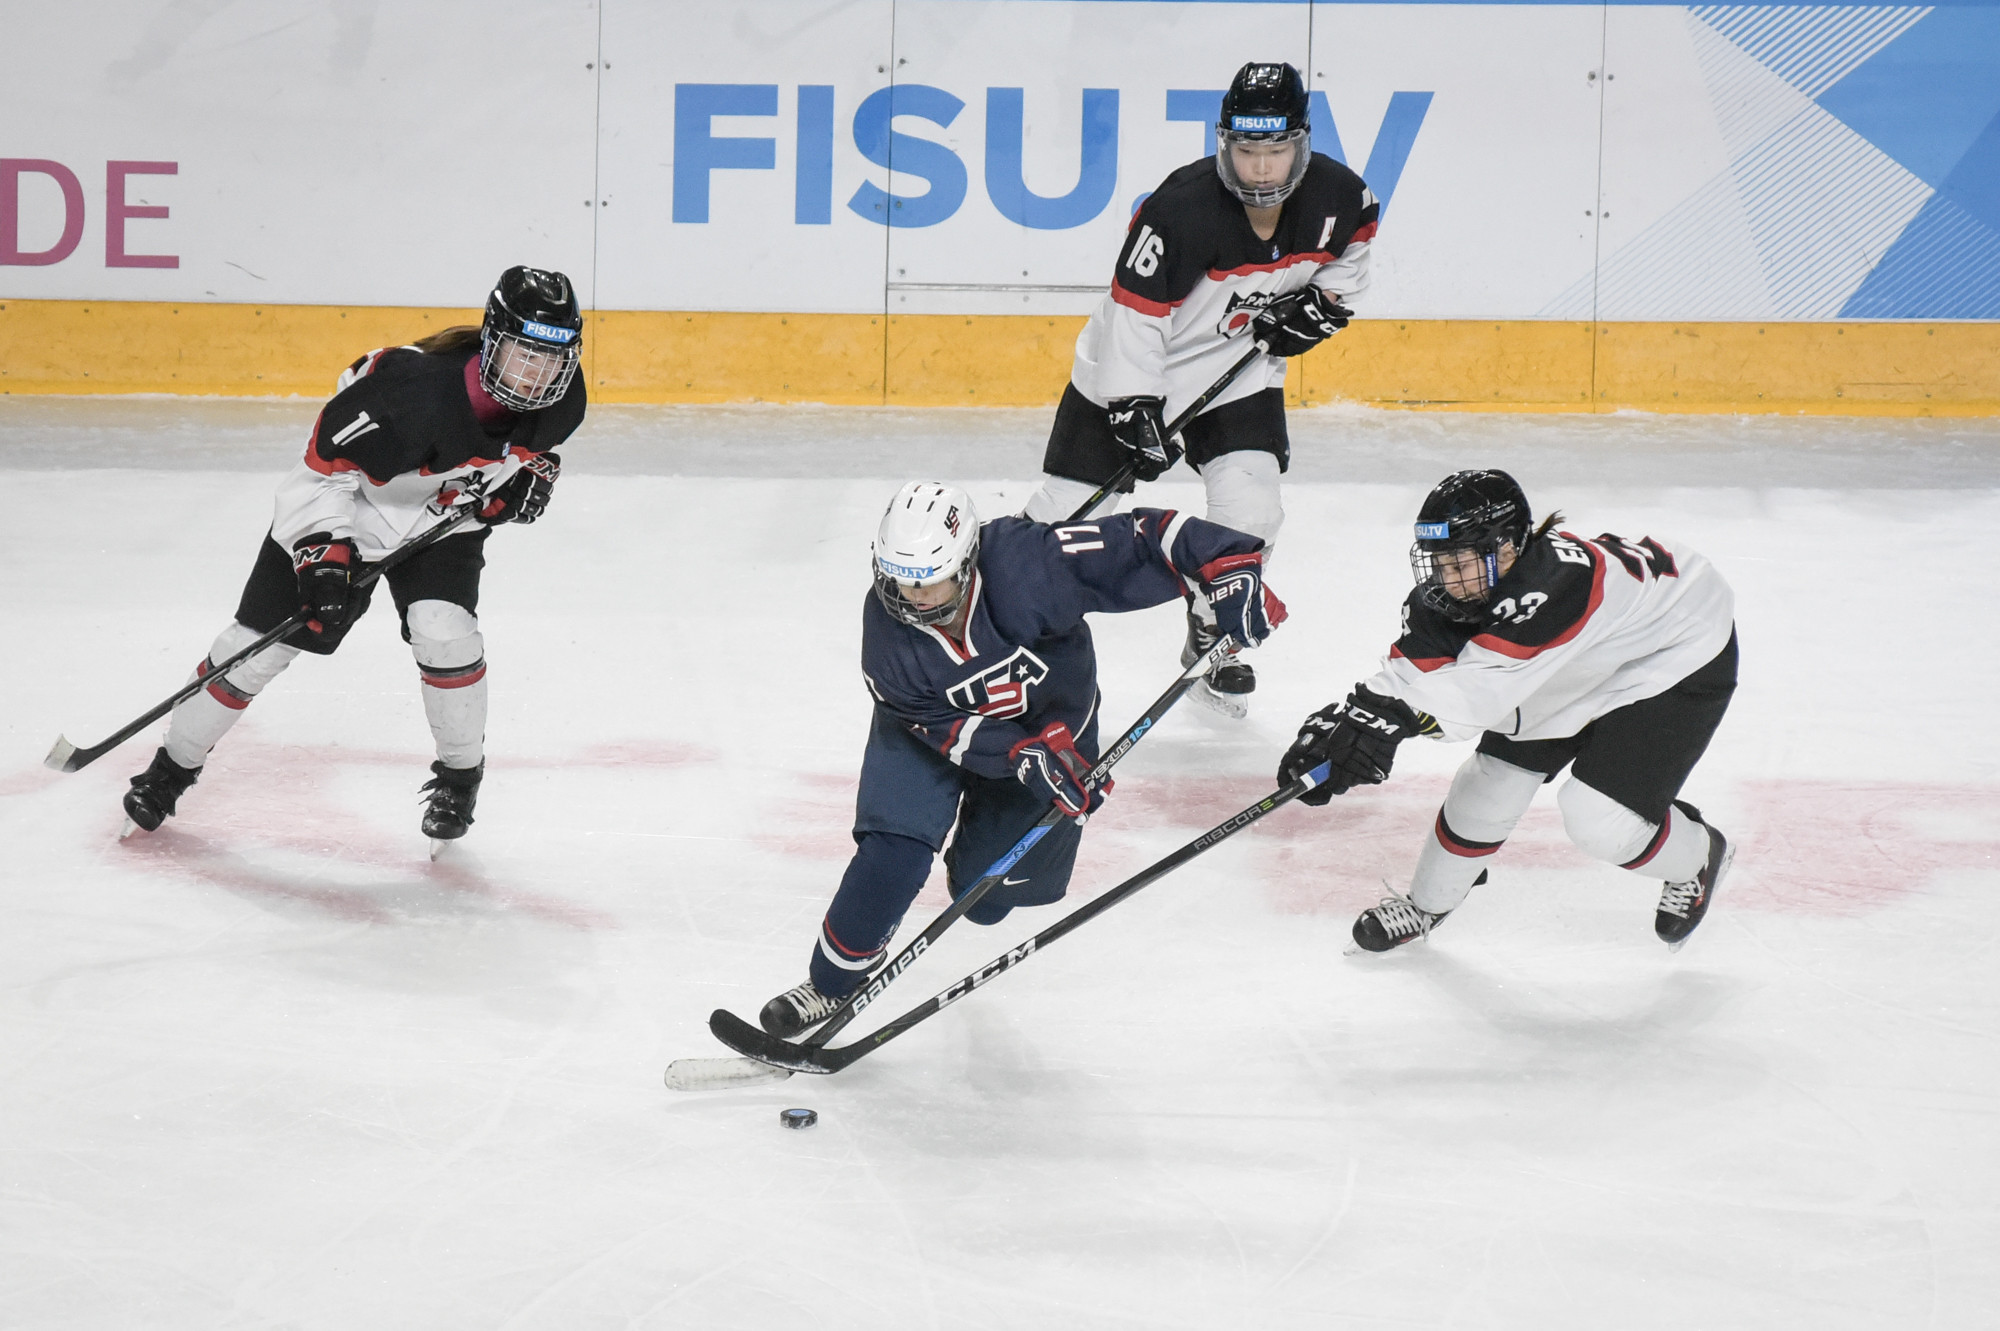 Japan played the United States to determine who would take the bronze medal in the women's ice hockey ©Krasnoyarsk 2019